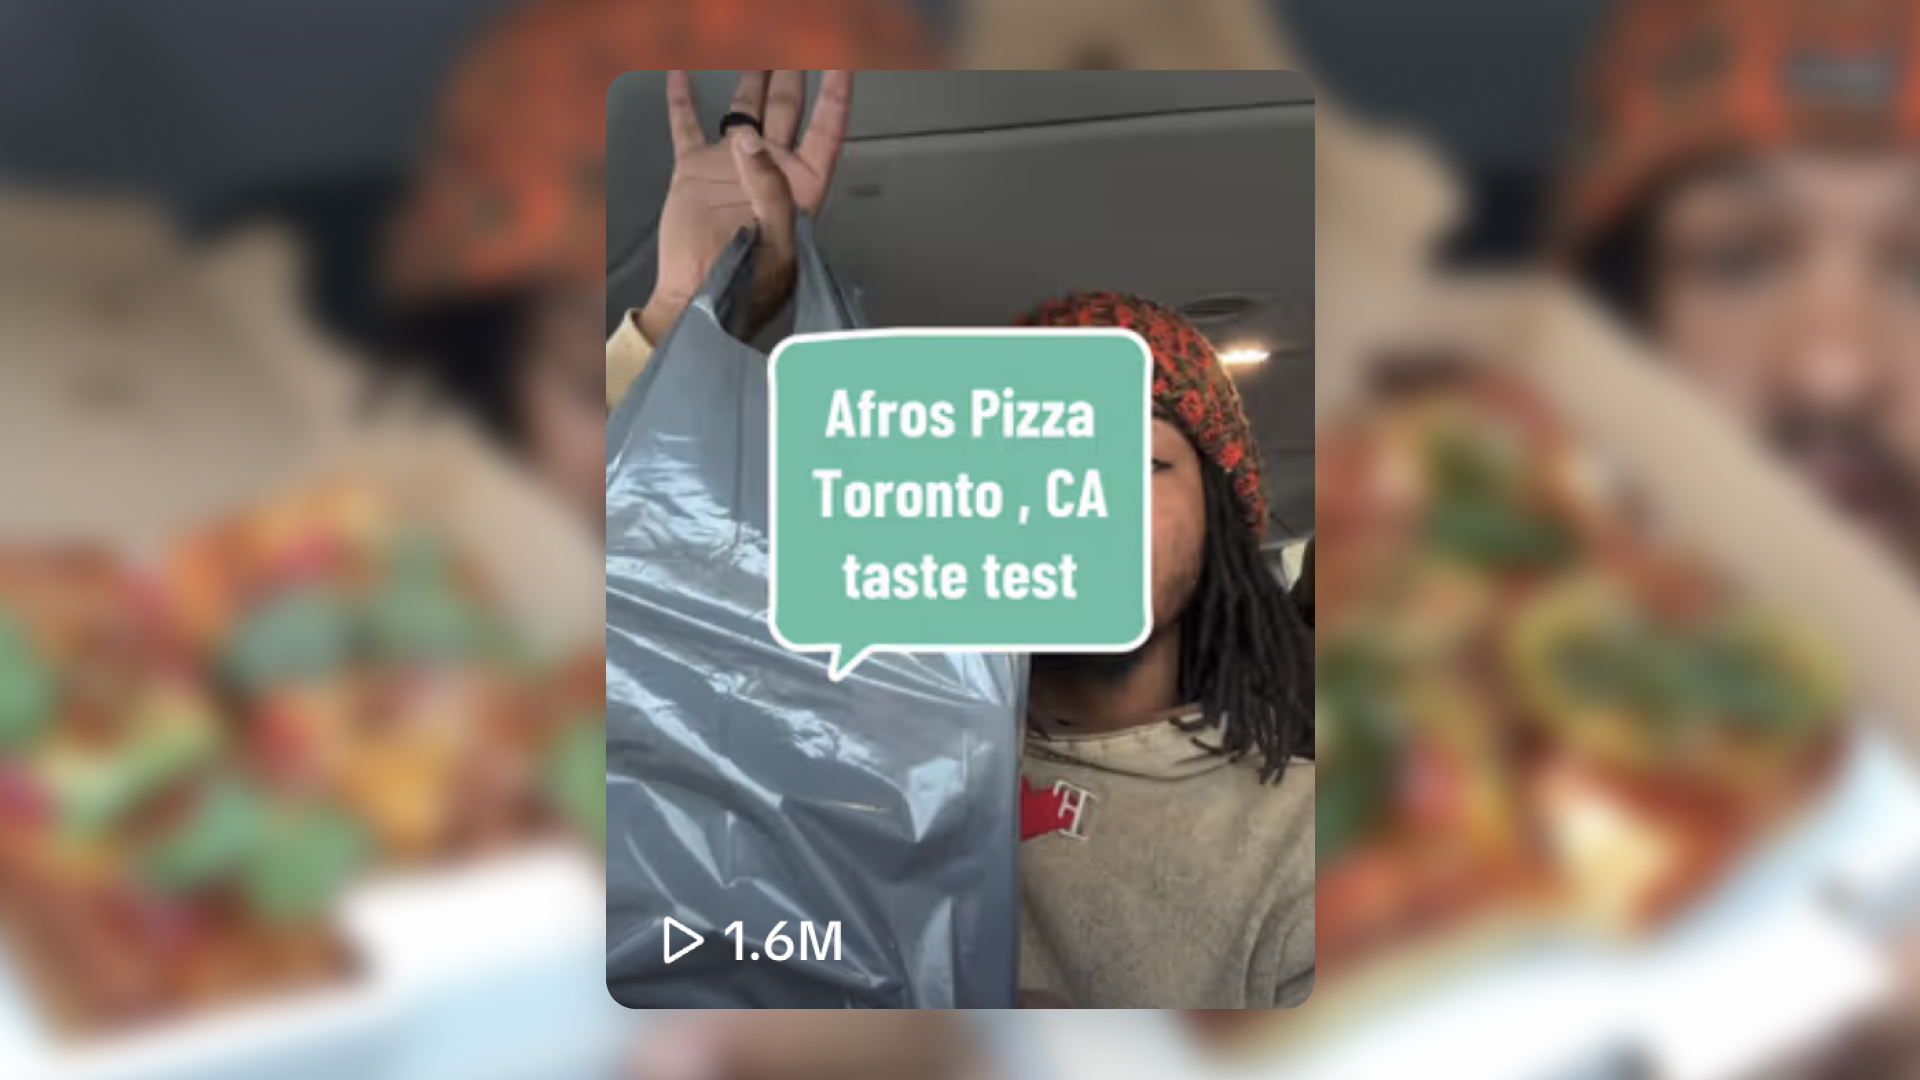 TikTok Famous Food Critic Keith Lee Rates Afro’s Pizza